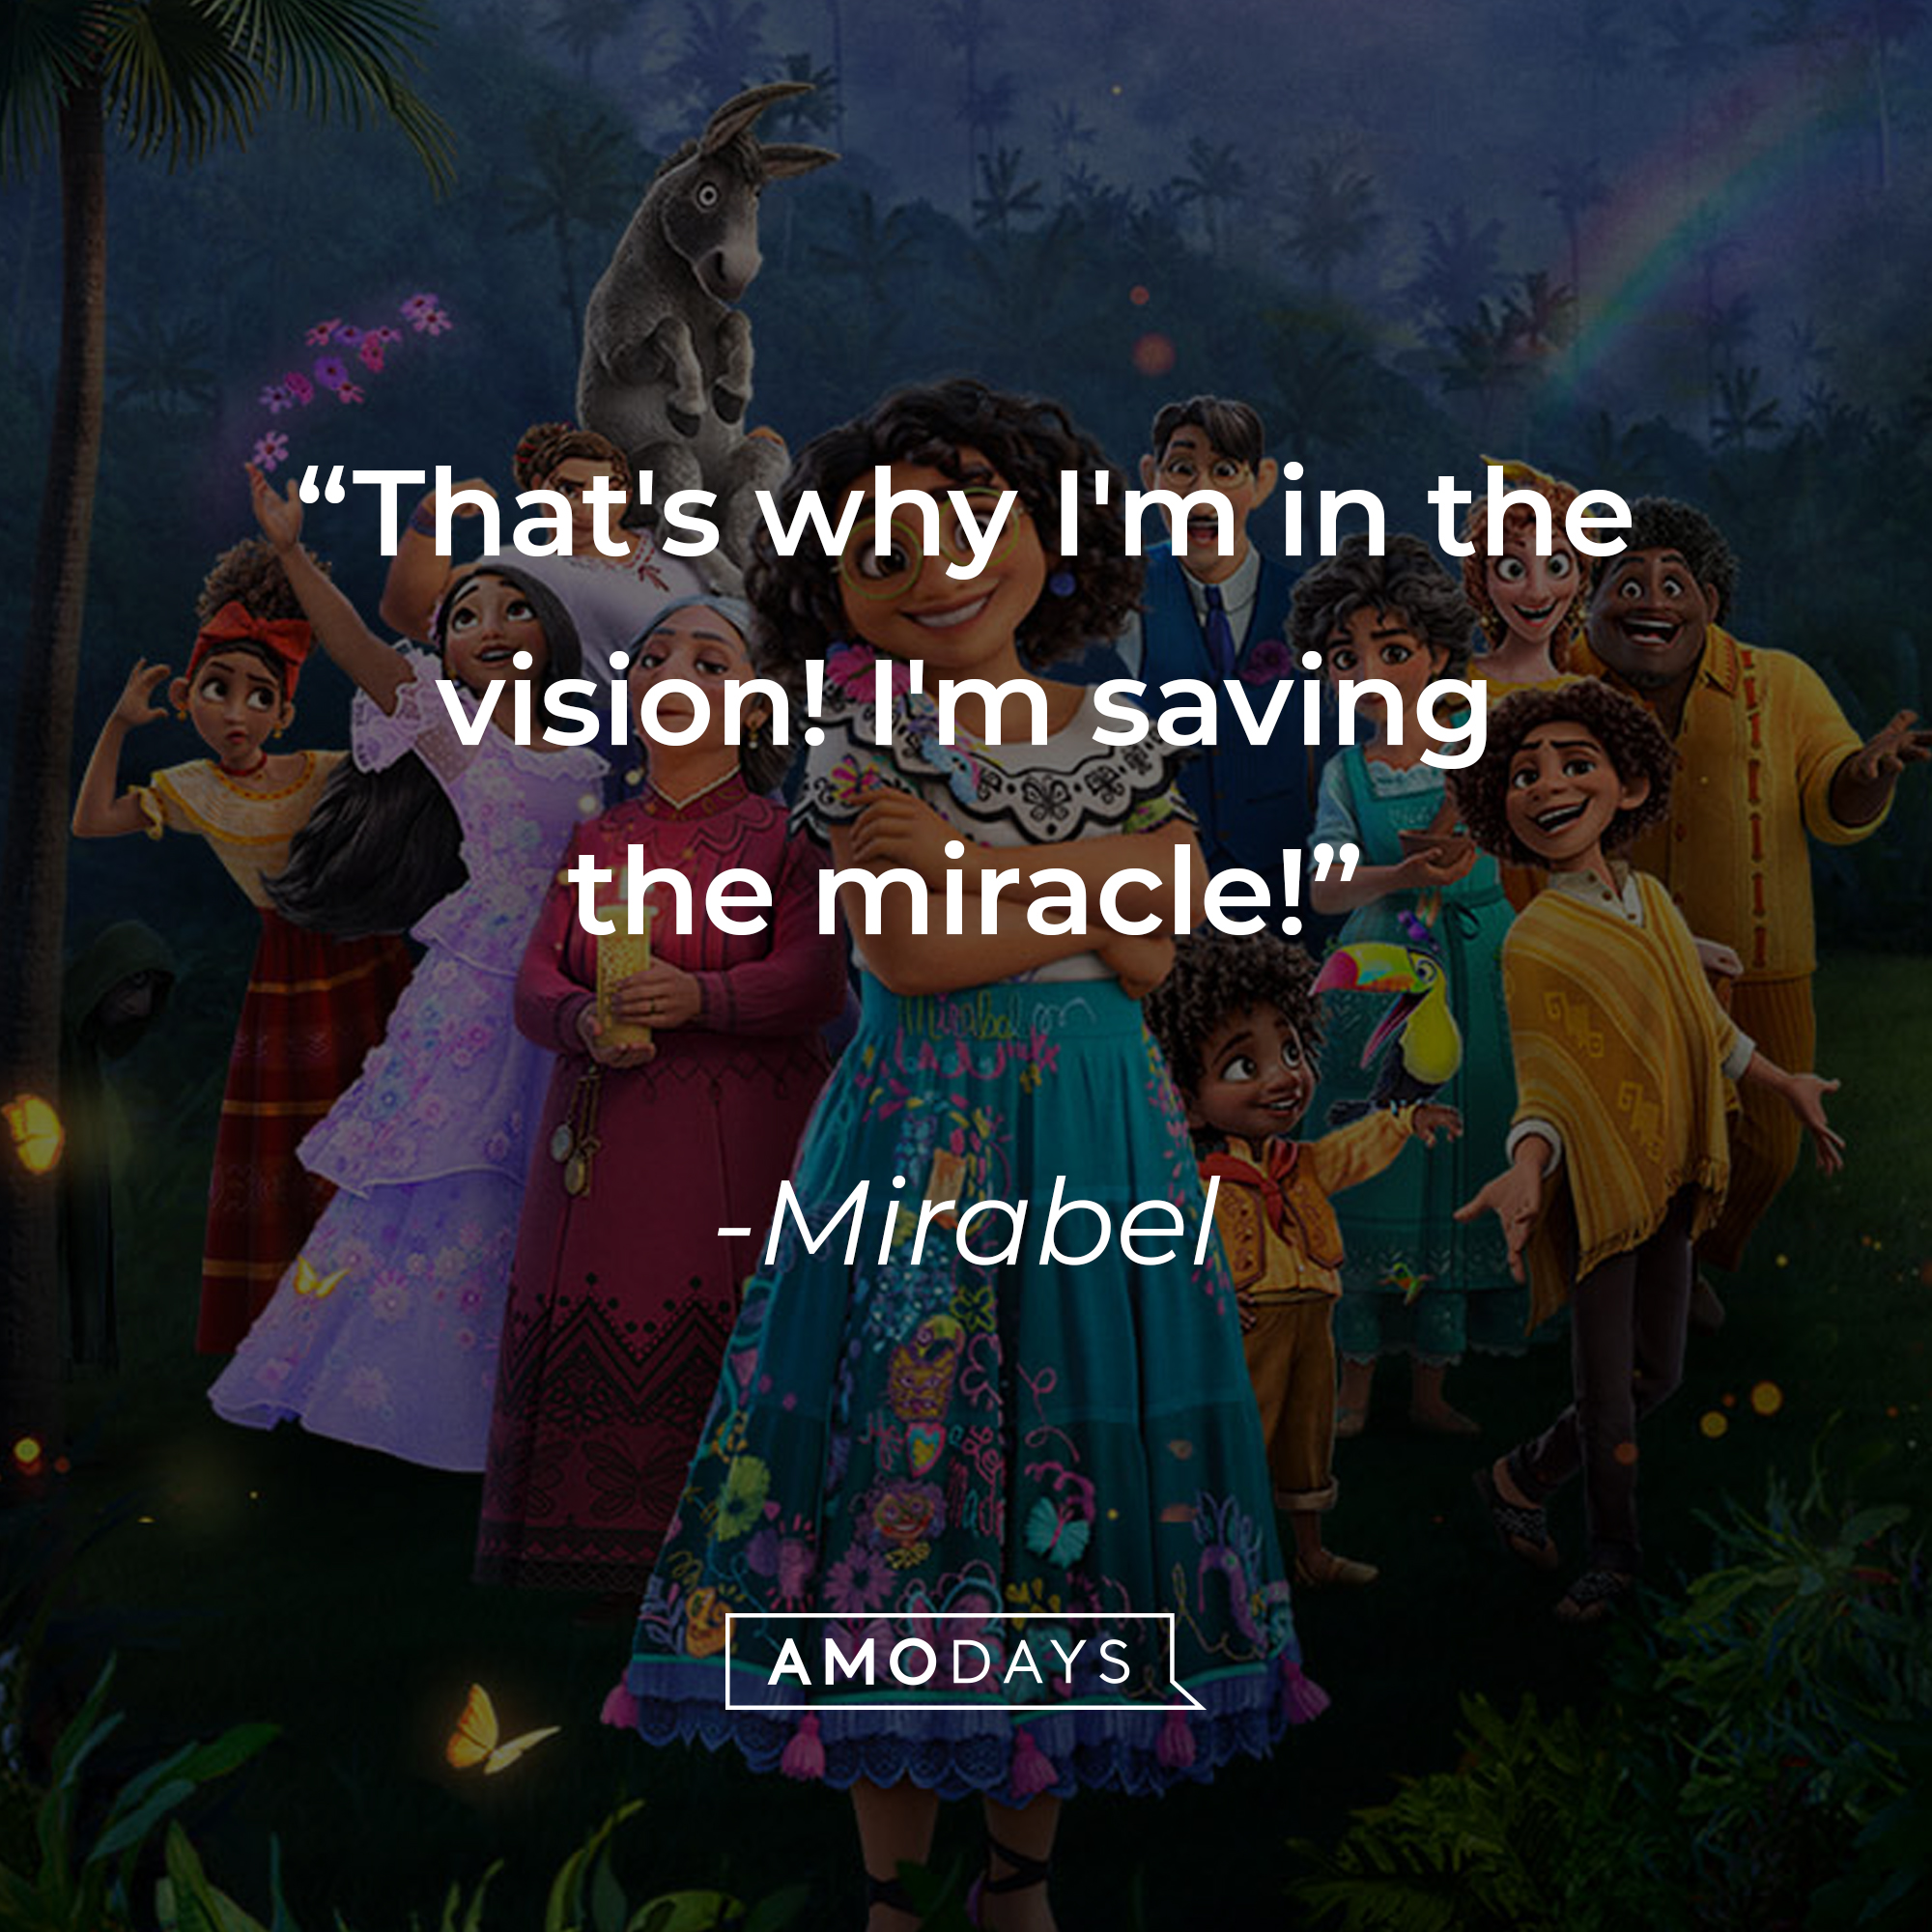 Mirabel's quote: “That's why I'm in the vision! I'm saving the miracle!” | Source: Facebook.com/EncantoMovie